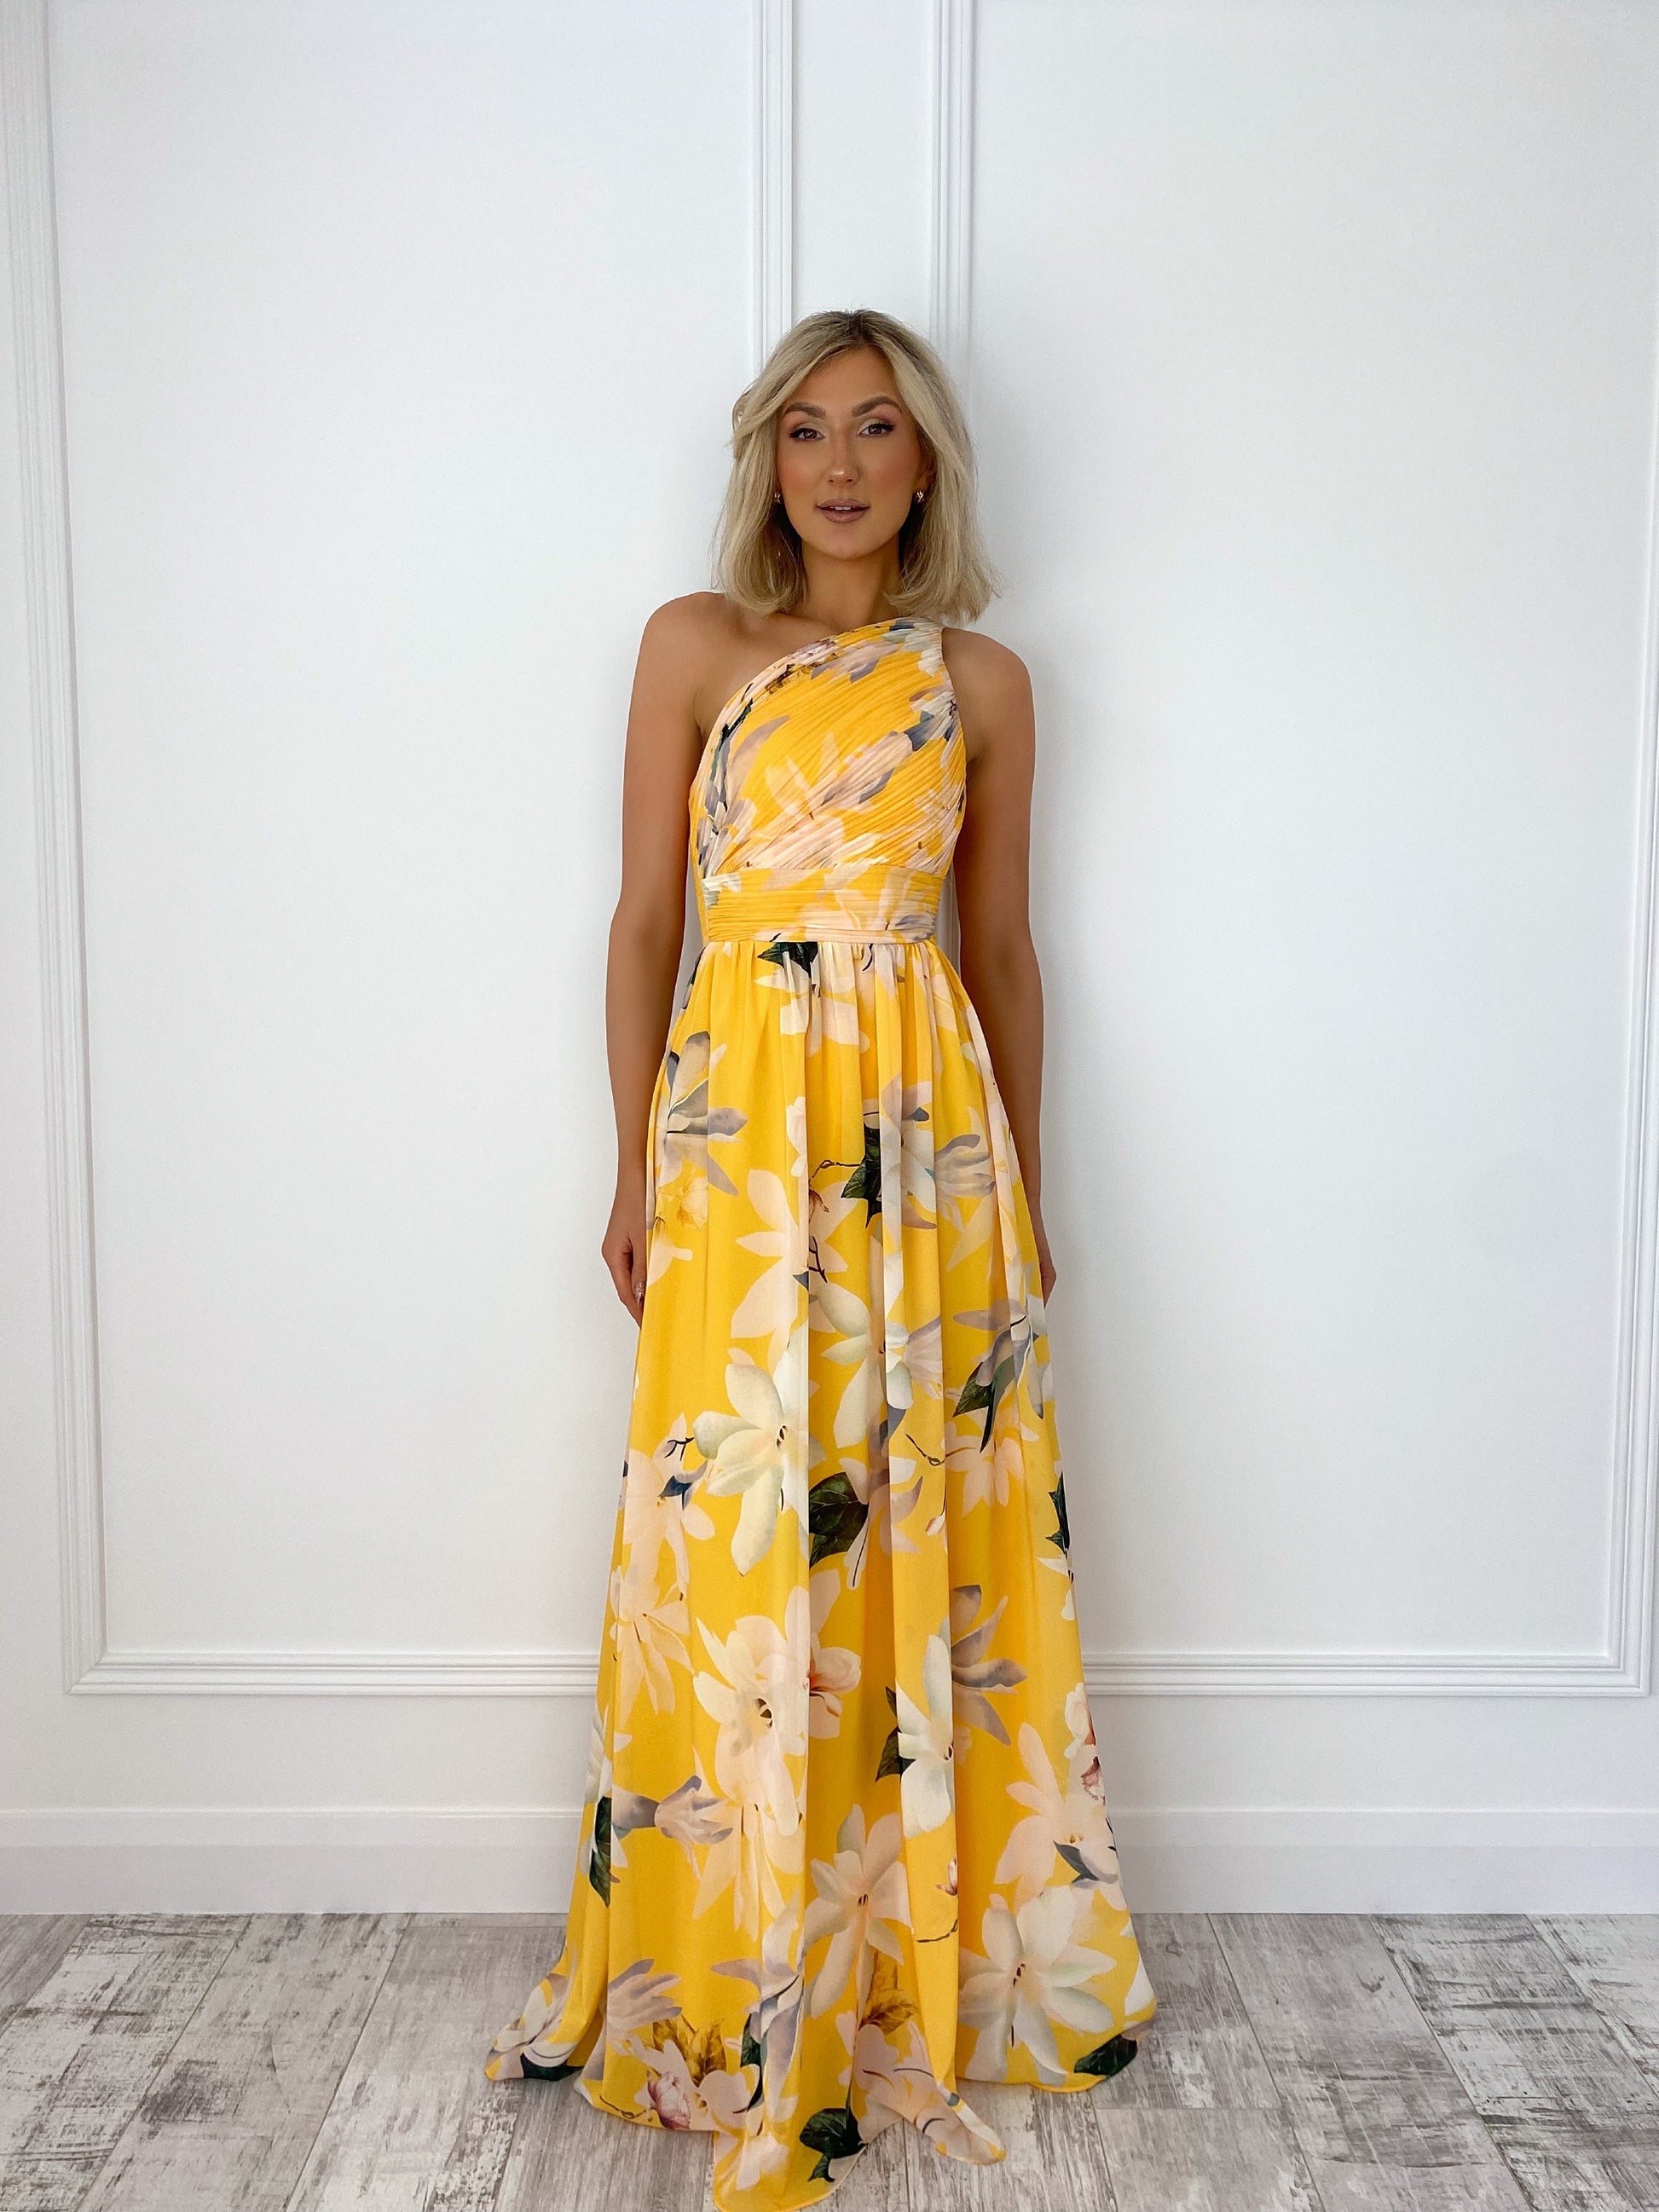 a woman in a yellow dress standing in front of a door 